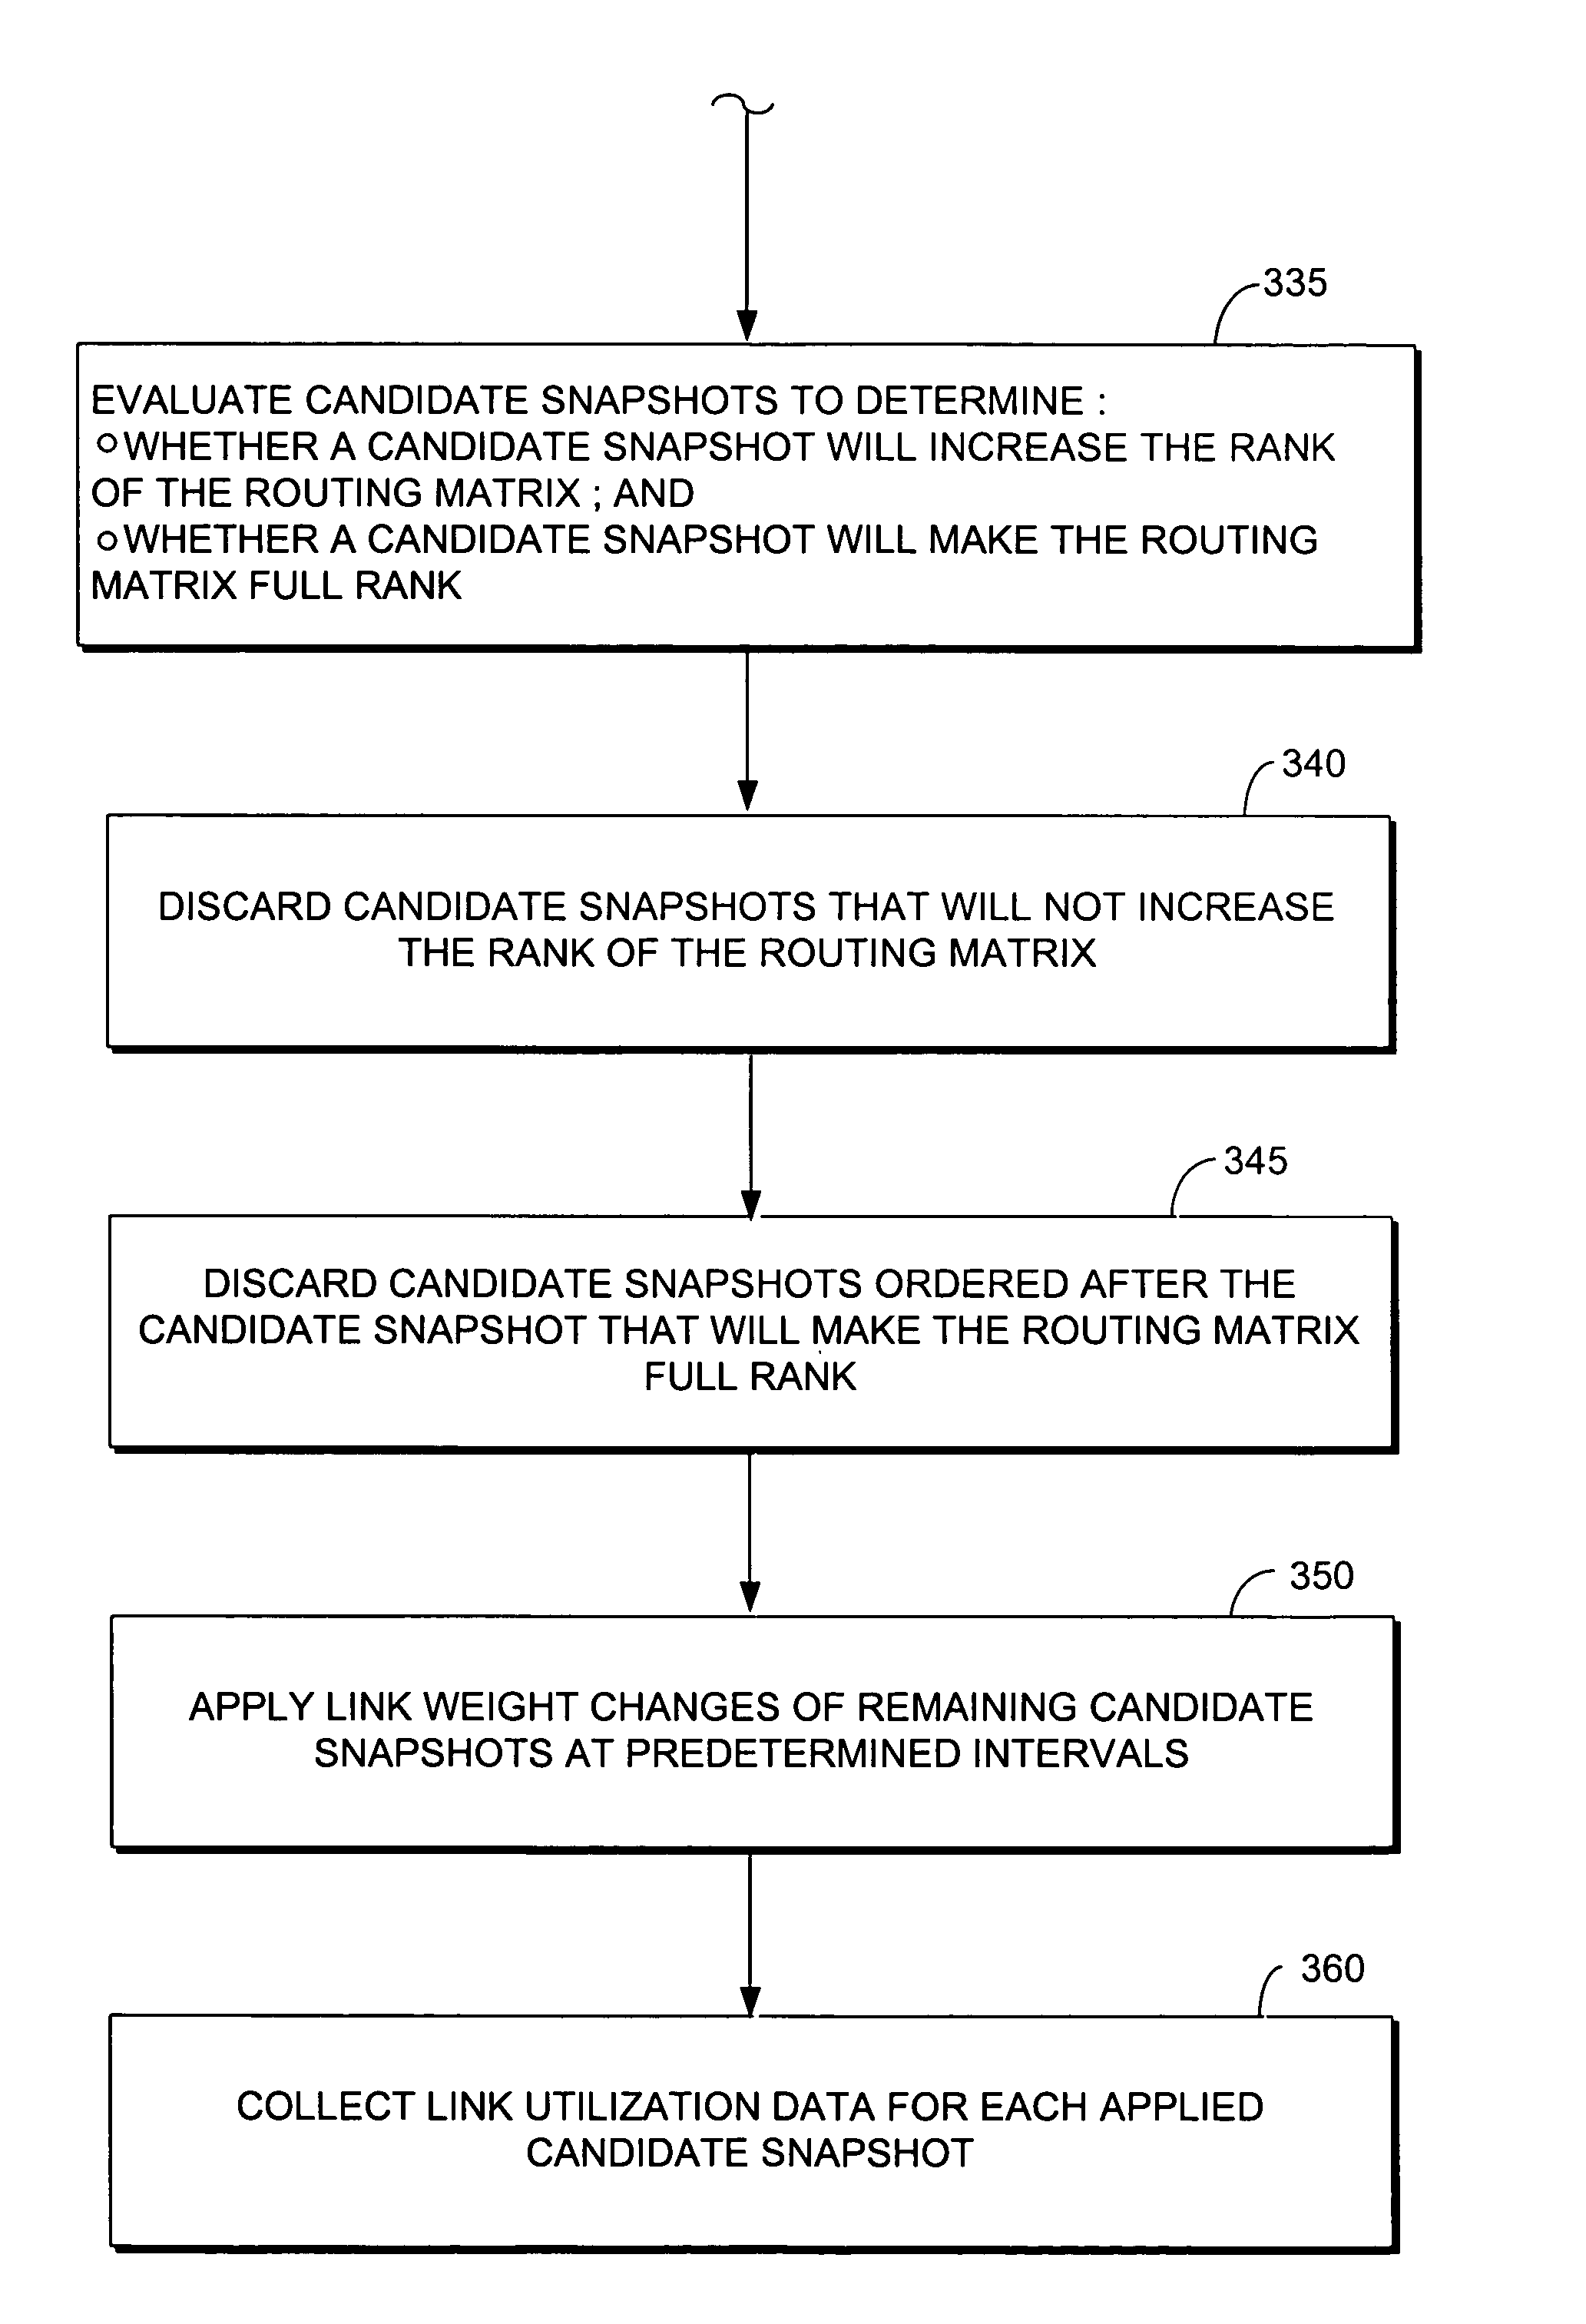 Method for altering link weights in a communication network within network parameters to provide traffic information for improved forecasting